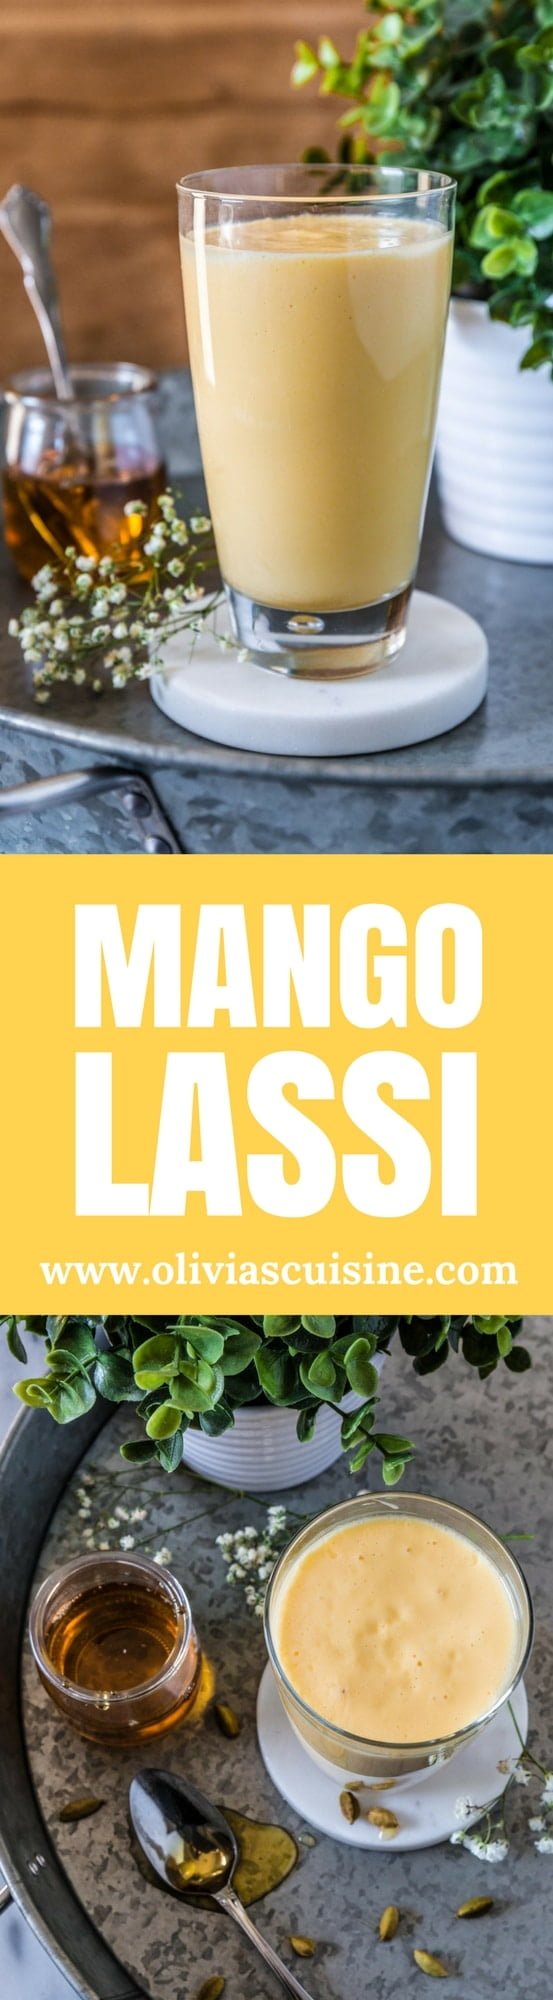 Mango Lassi | www.oliviascuisine.com | There's nothing as refreshing as a delicious Mango Lassi! This popular yogurt-based Indian drink is like a mango milkshake that you can have for breakfast. (Recipe by @oliviascuisine.)